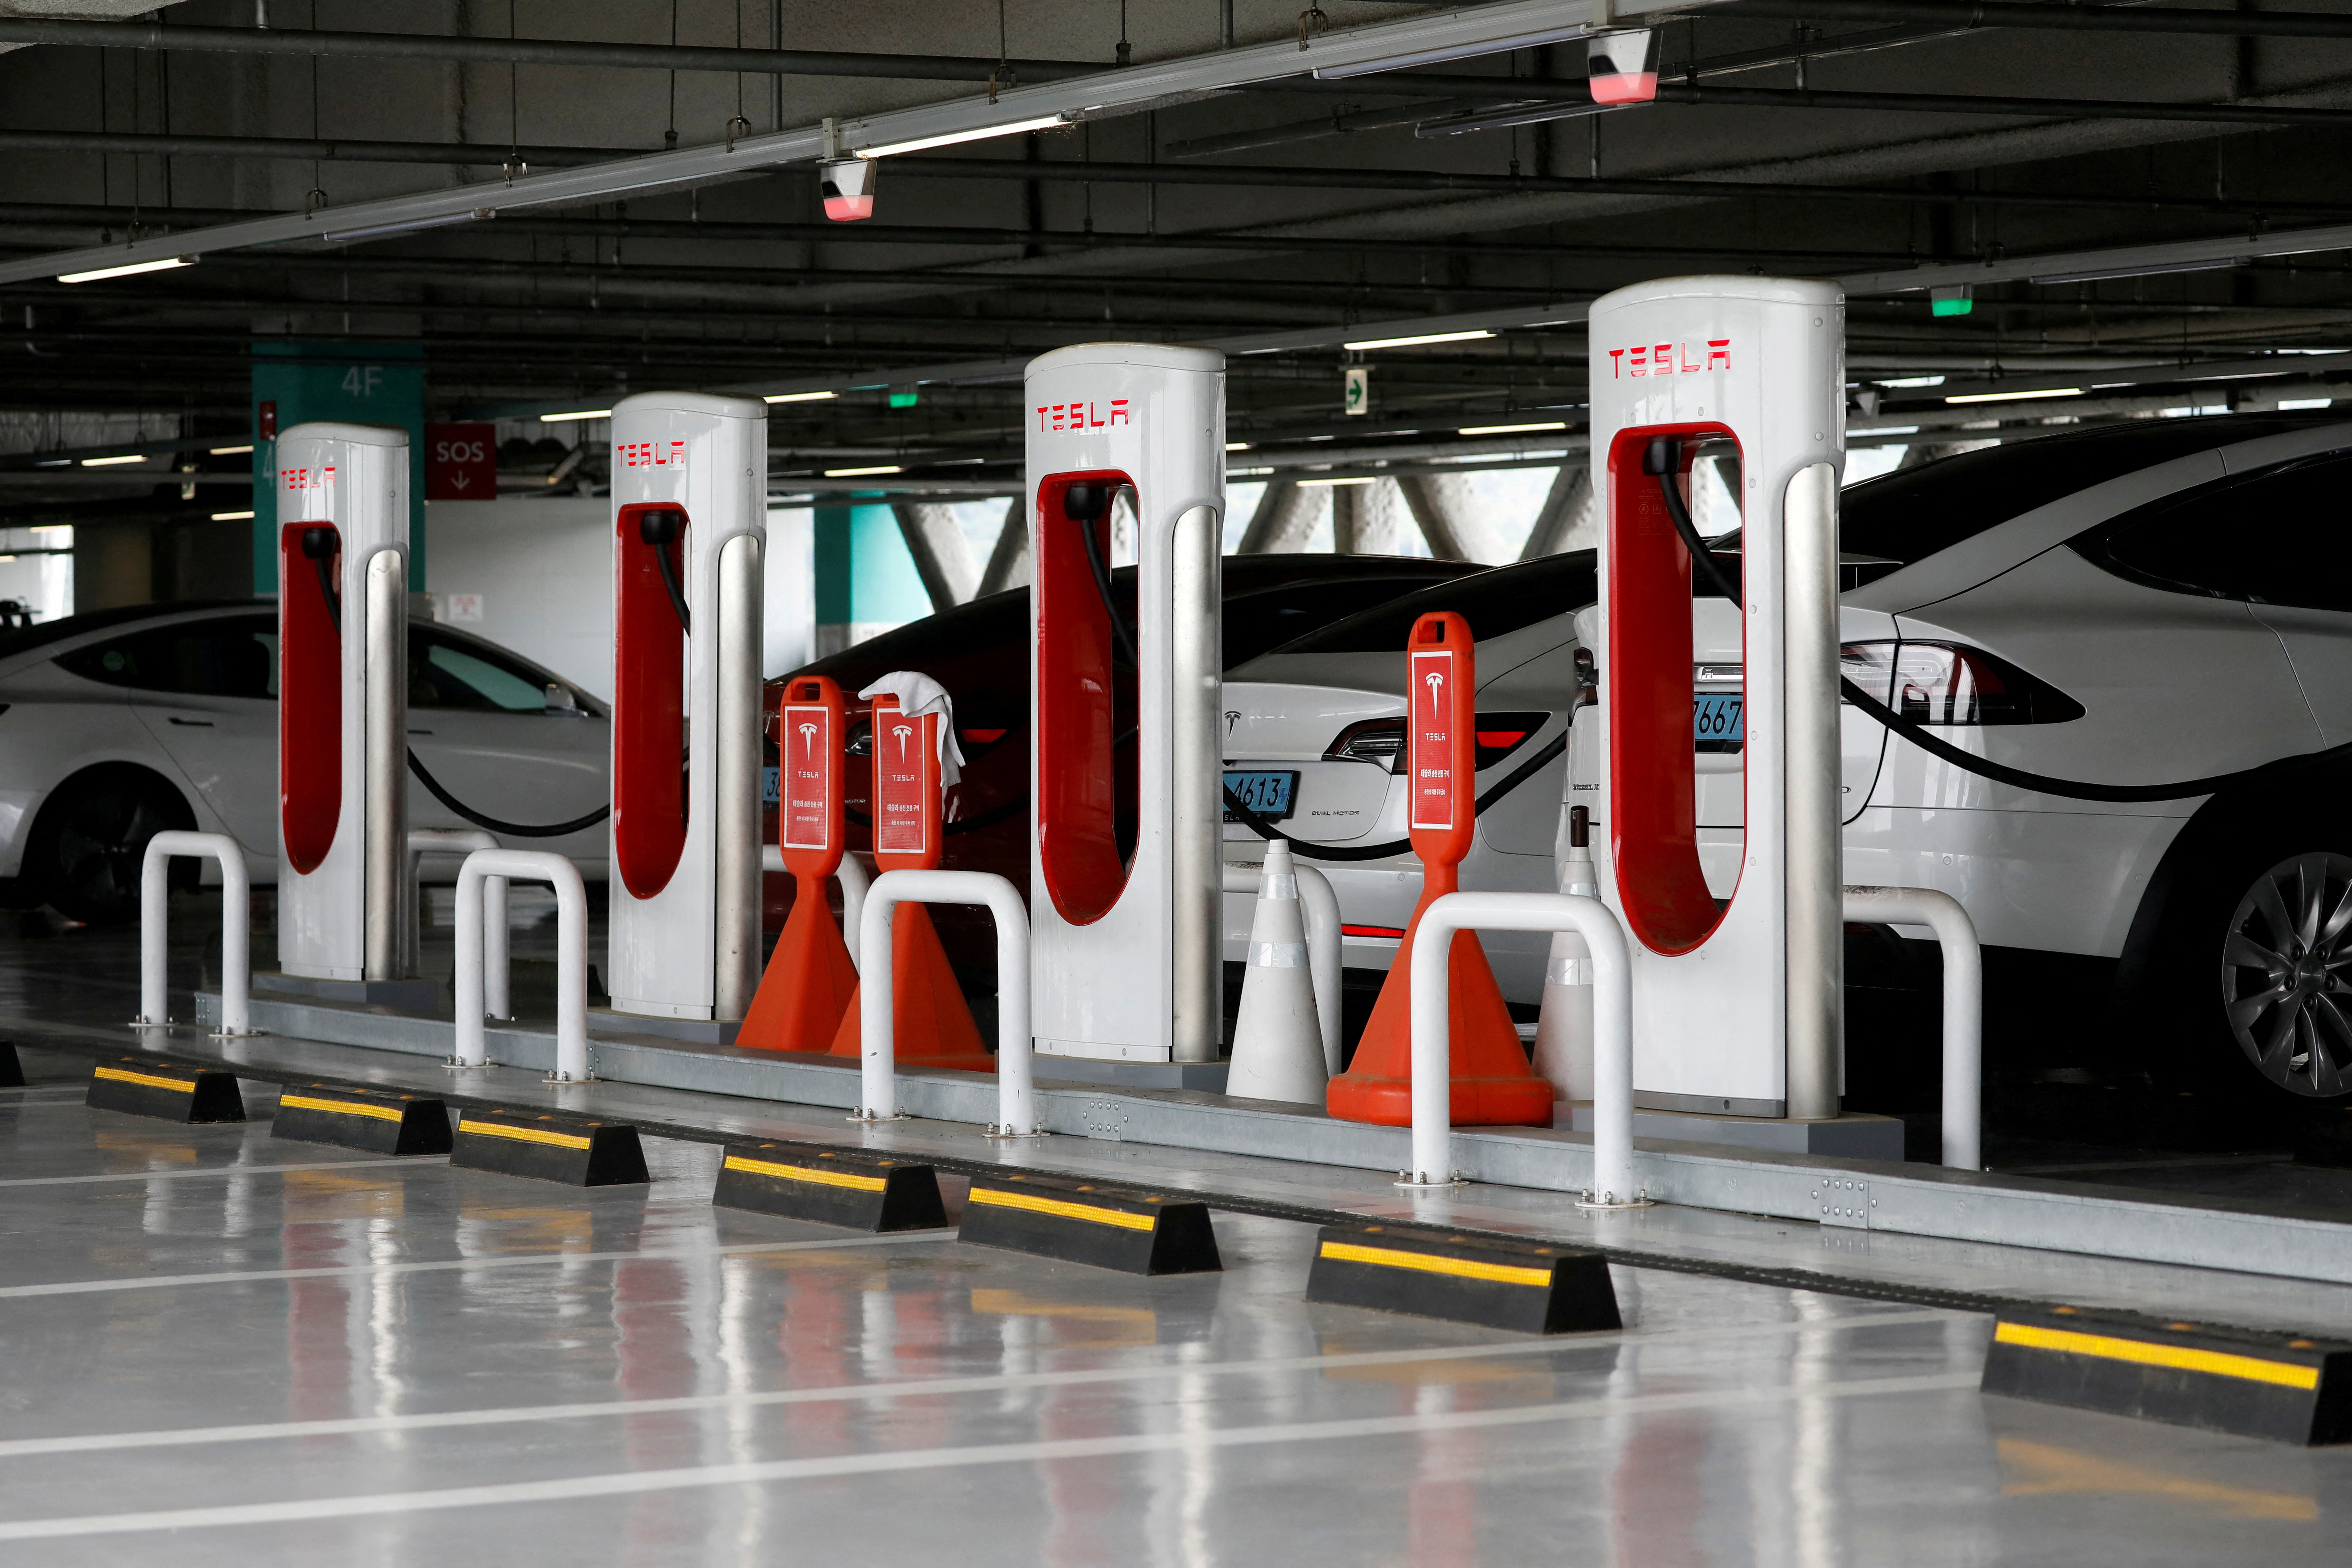 CCS vs Type 2 vs Chademo: must-know differences in EV charging